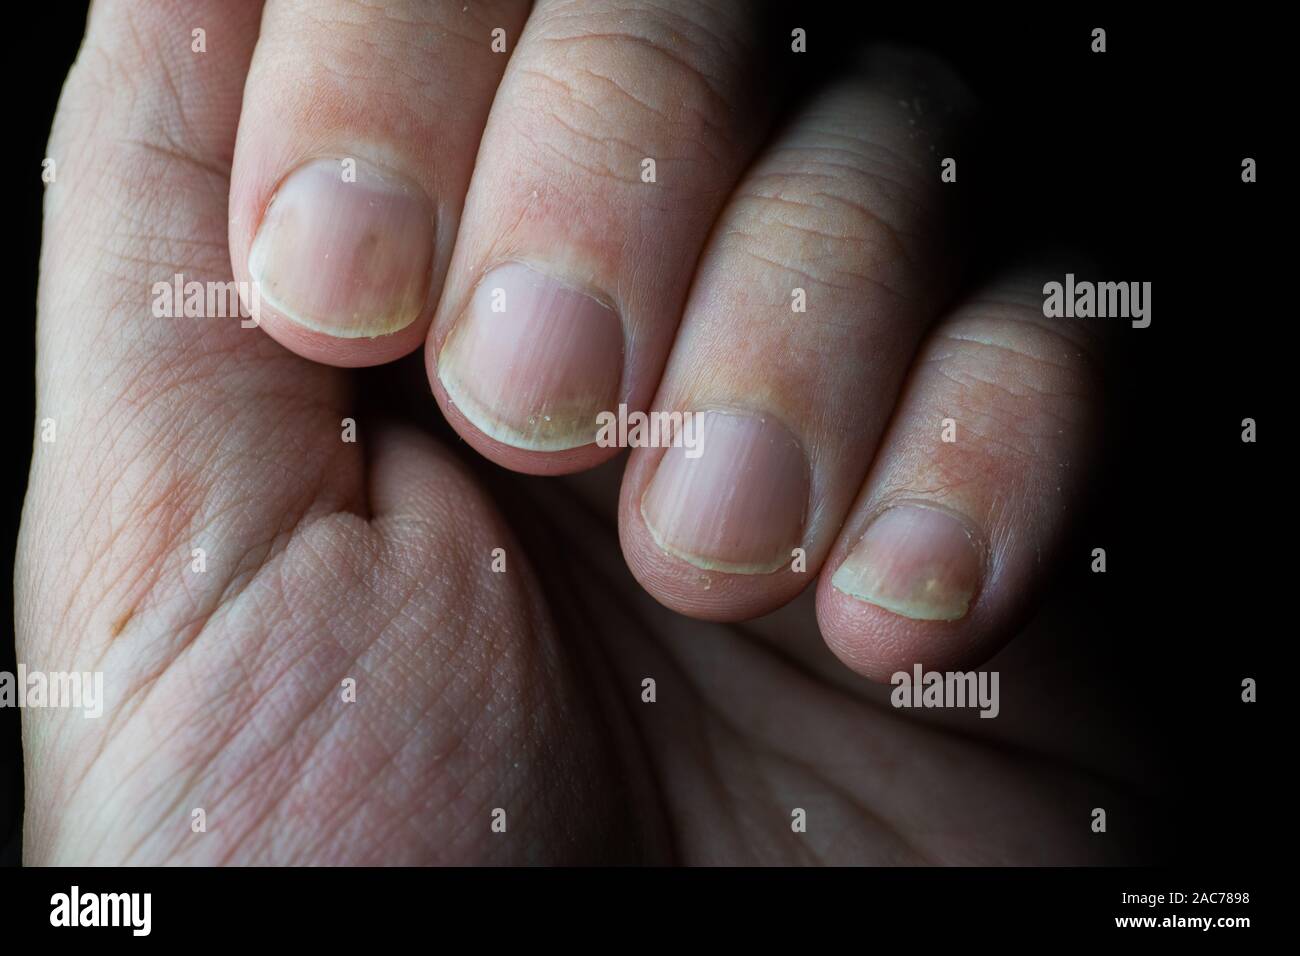 Contact eczema induced by hybrid manicure. The role of acrylates as a  causative factor